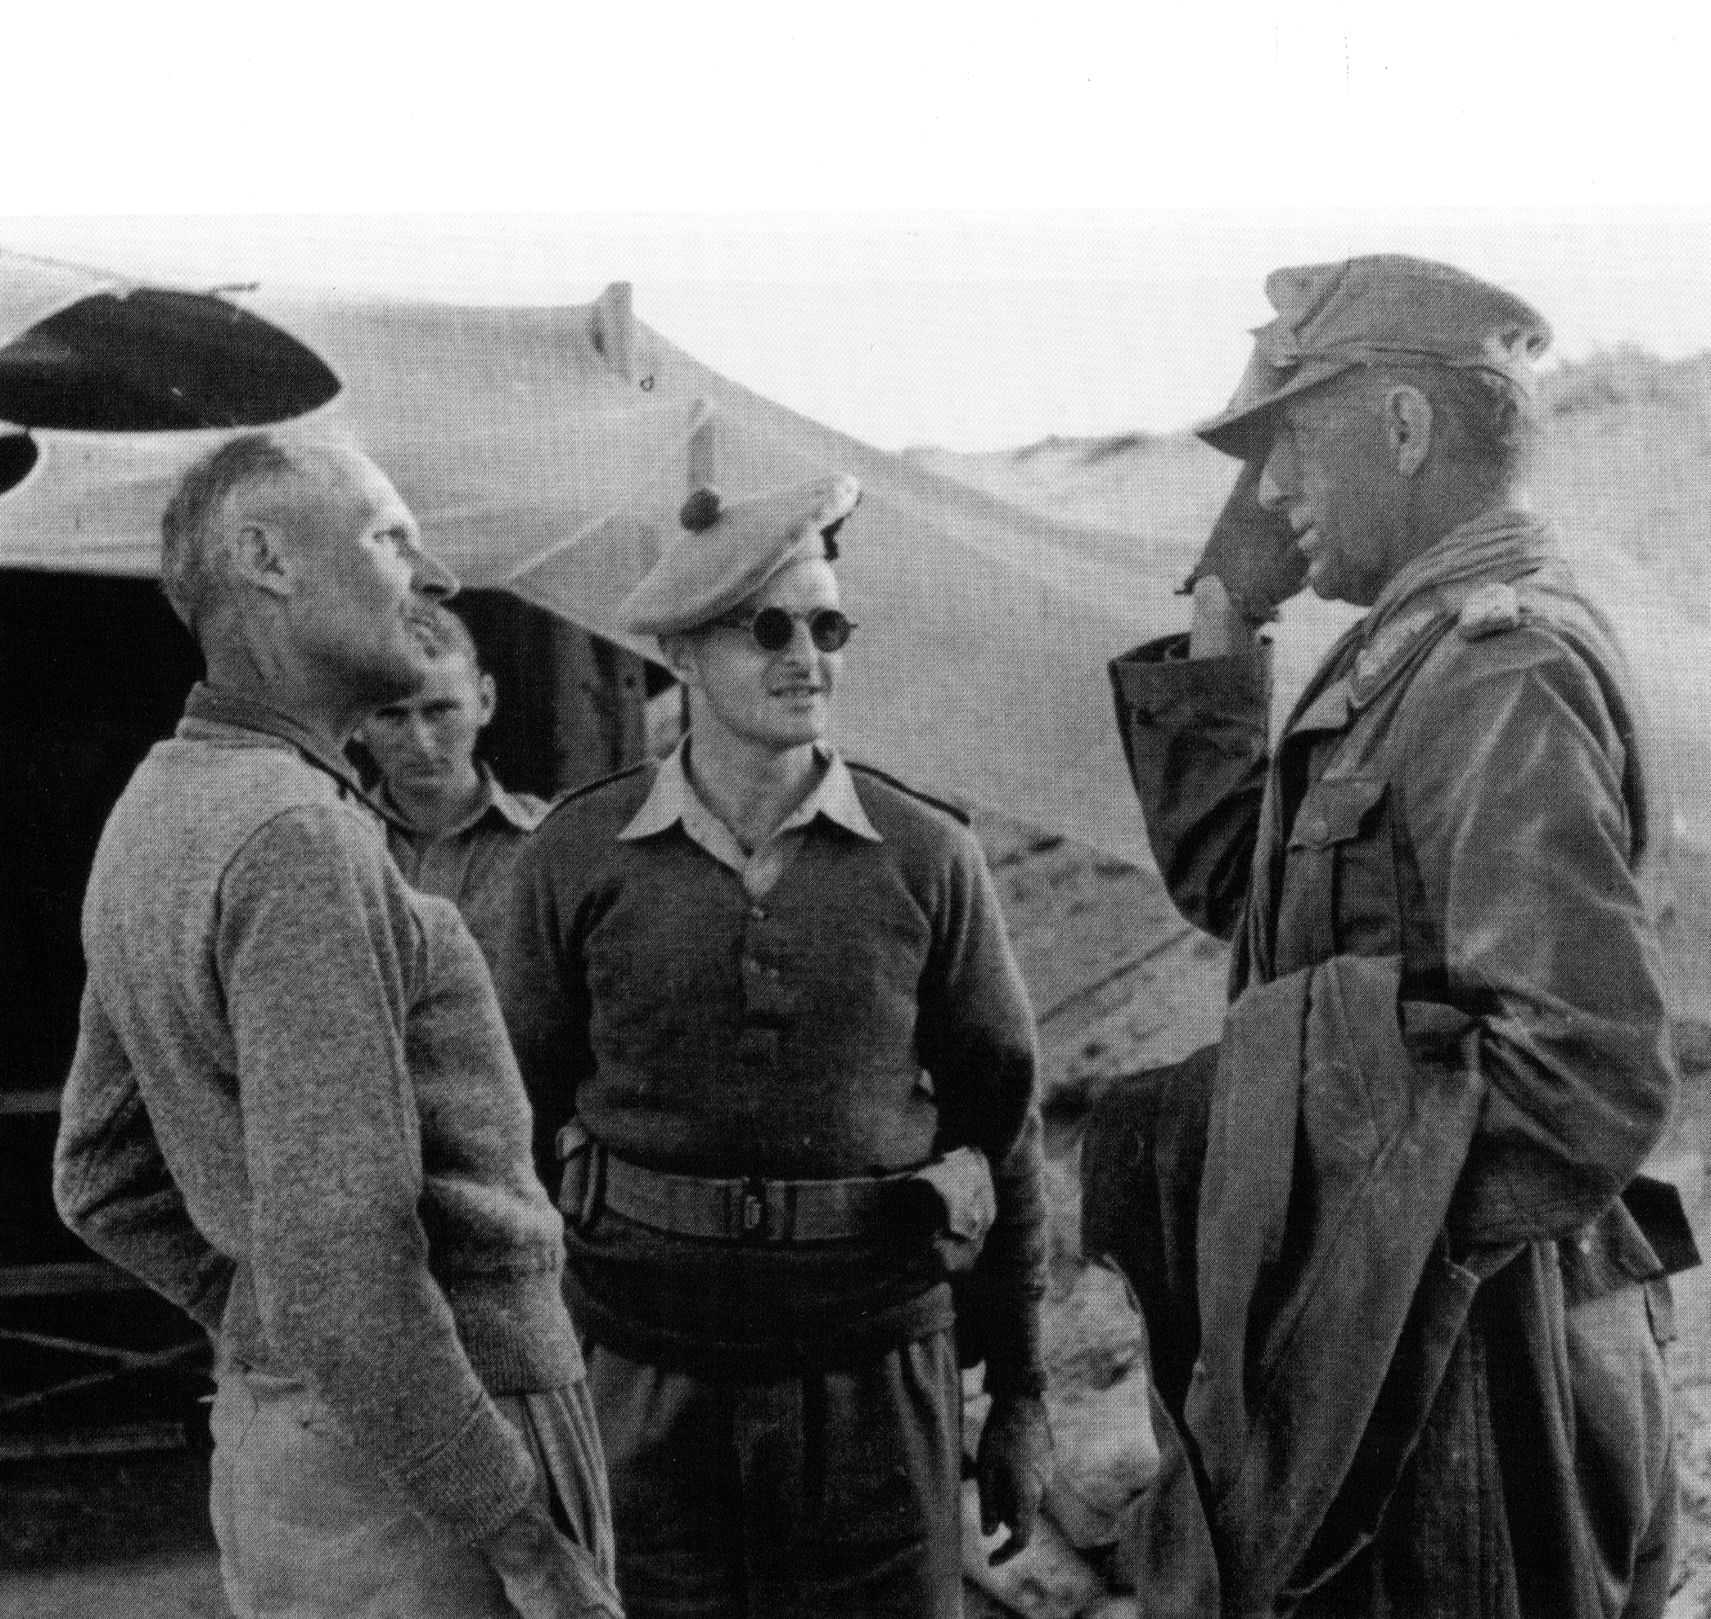 Afrika Korps commander Ritter von Thoma meets Field Marshal Bernard Montgomery following the capture of German general during the fighting at El Alamein and the long German withdrawal to Tunisia and surrender.